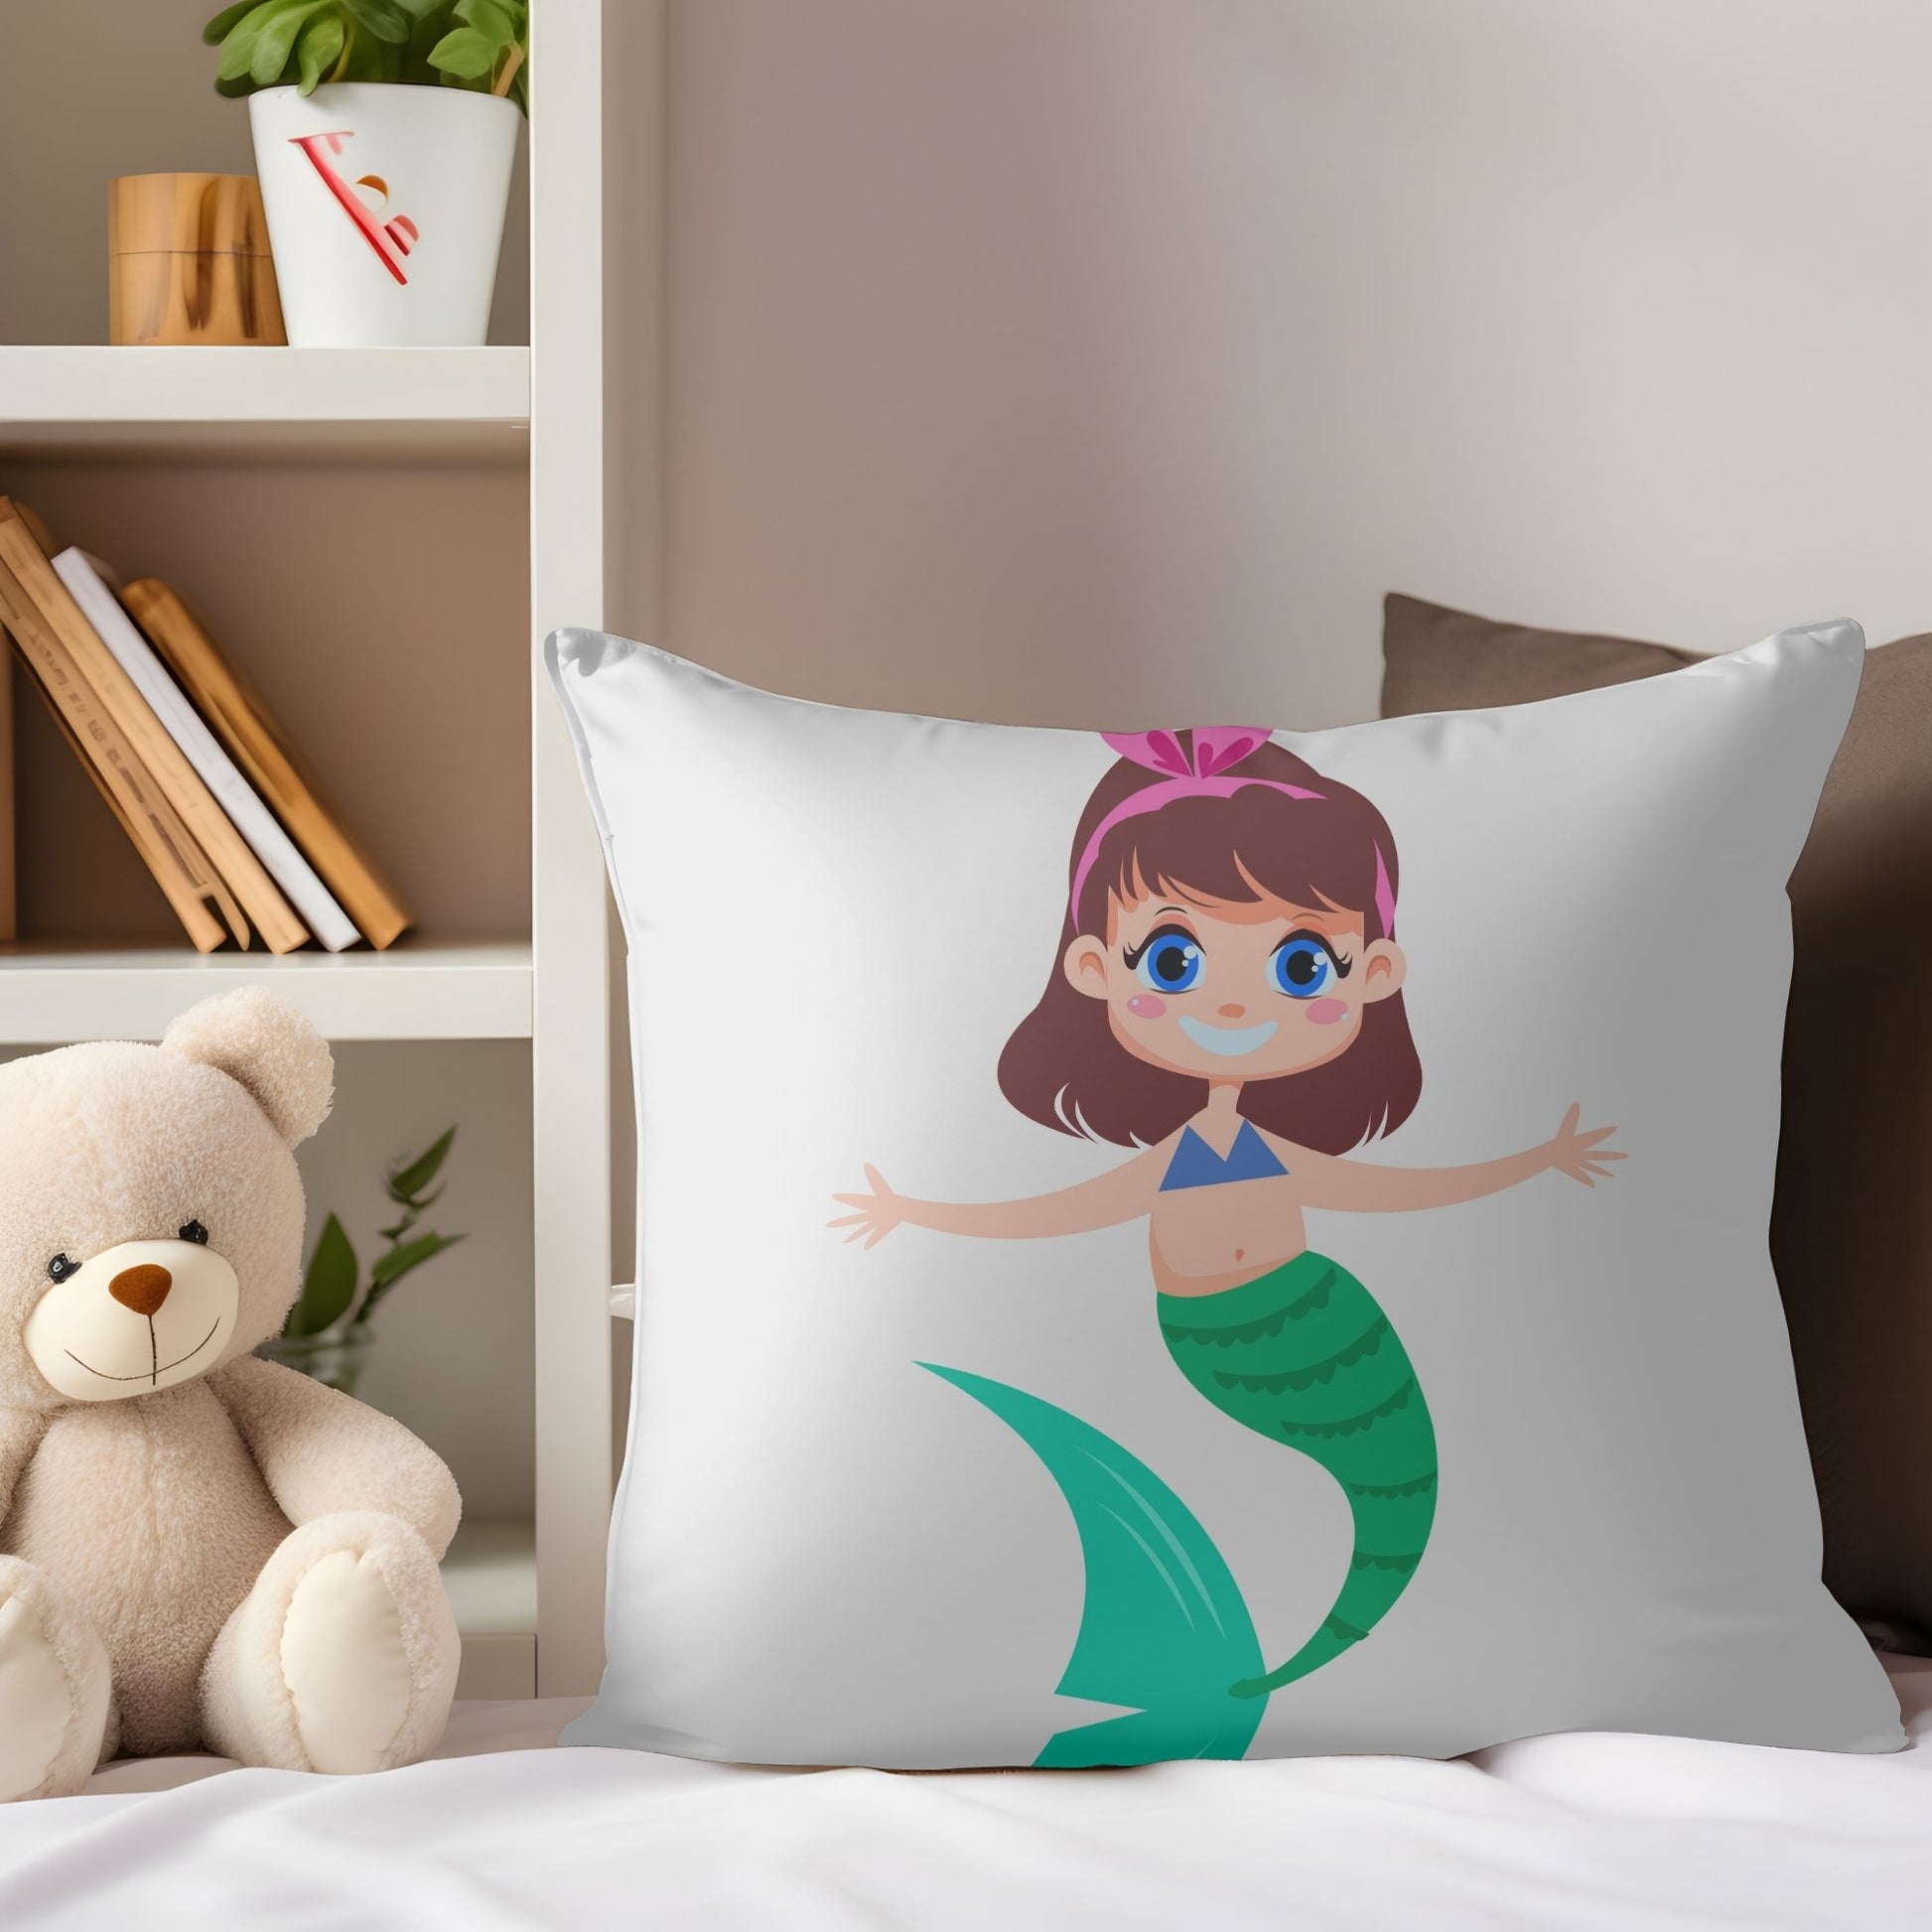 Soft pillow adorned with a mermaid design for girls' bedrooms.